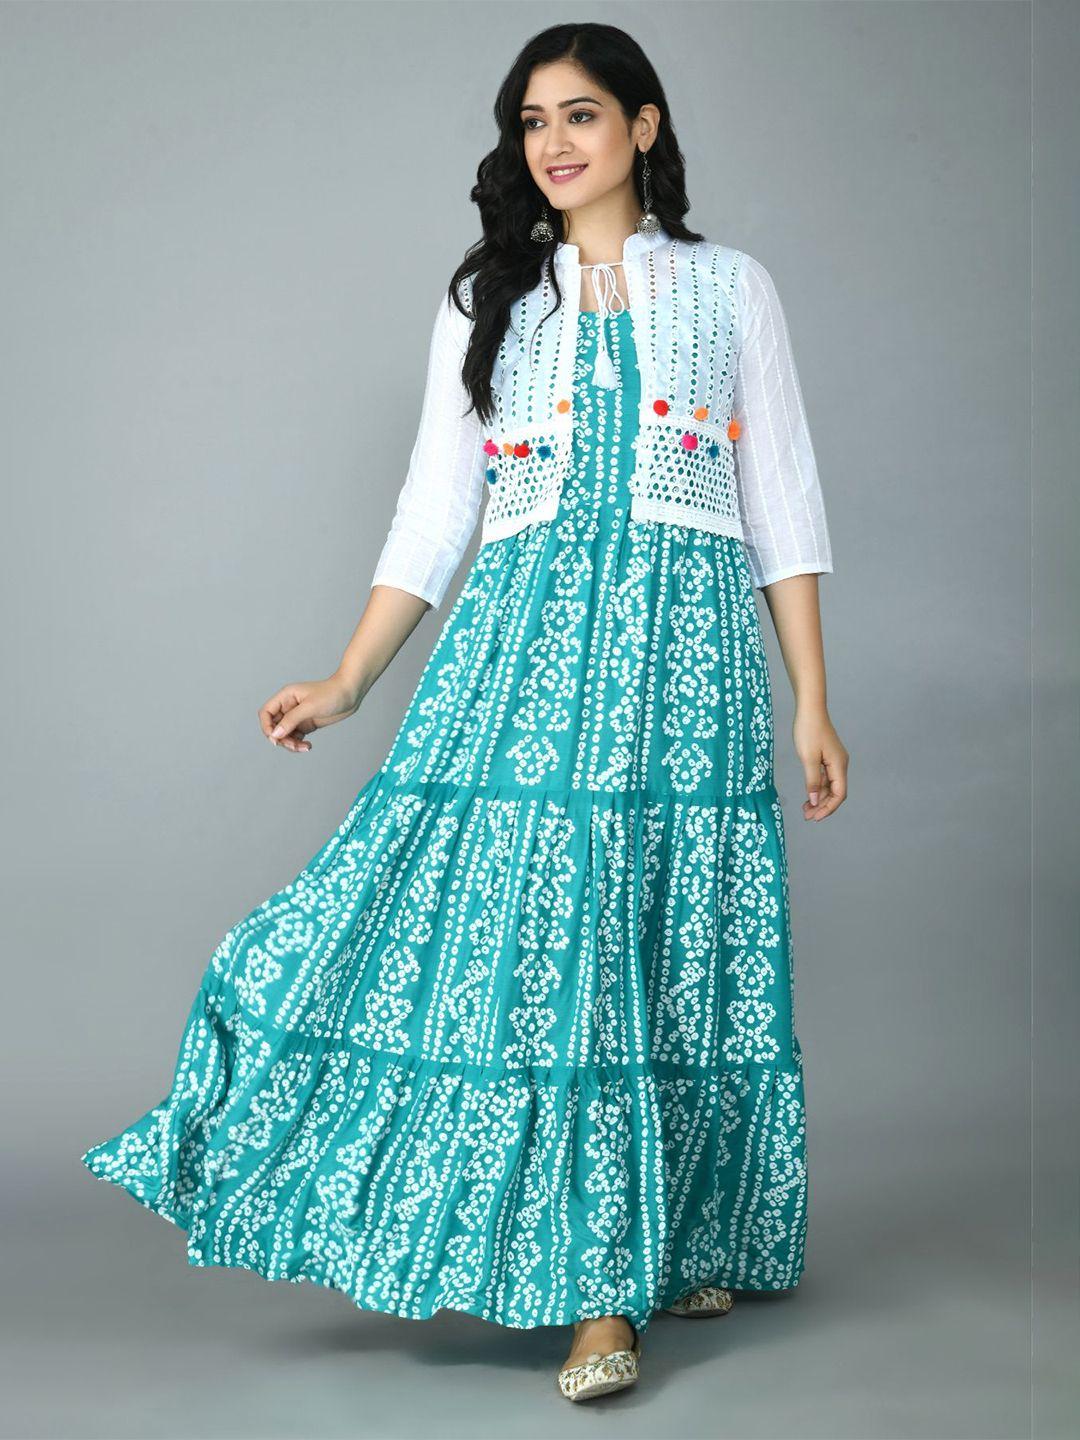 queenswear creation turquoise blue & white ethnic motifs ethnic a-line maxi dress